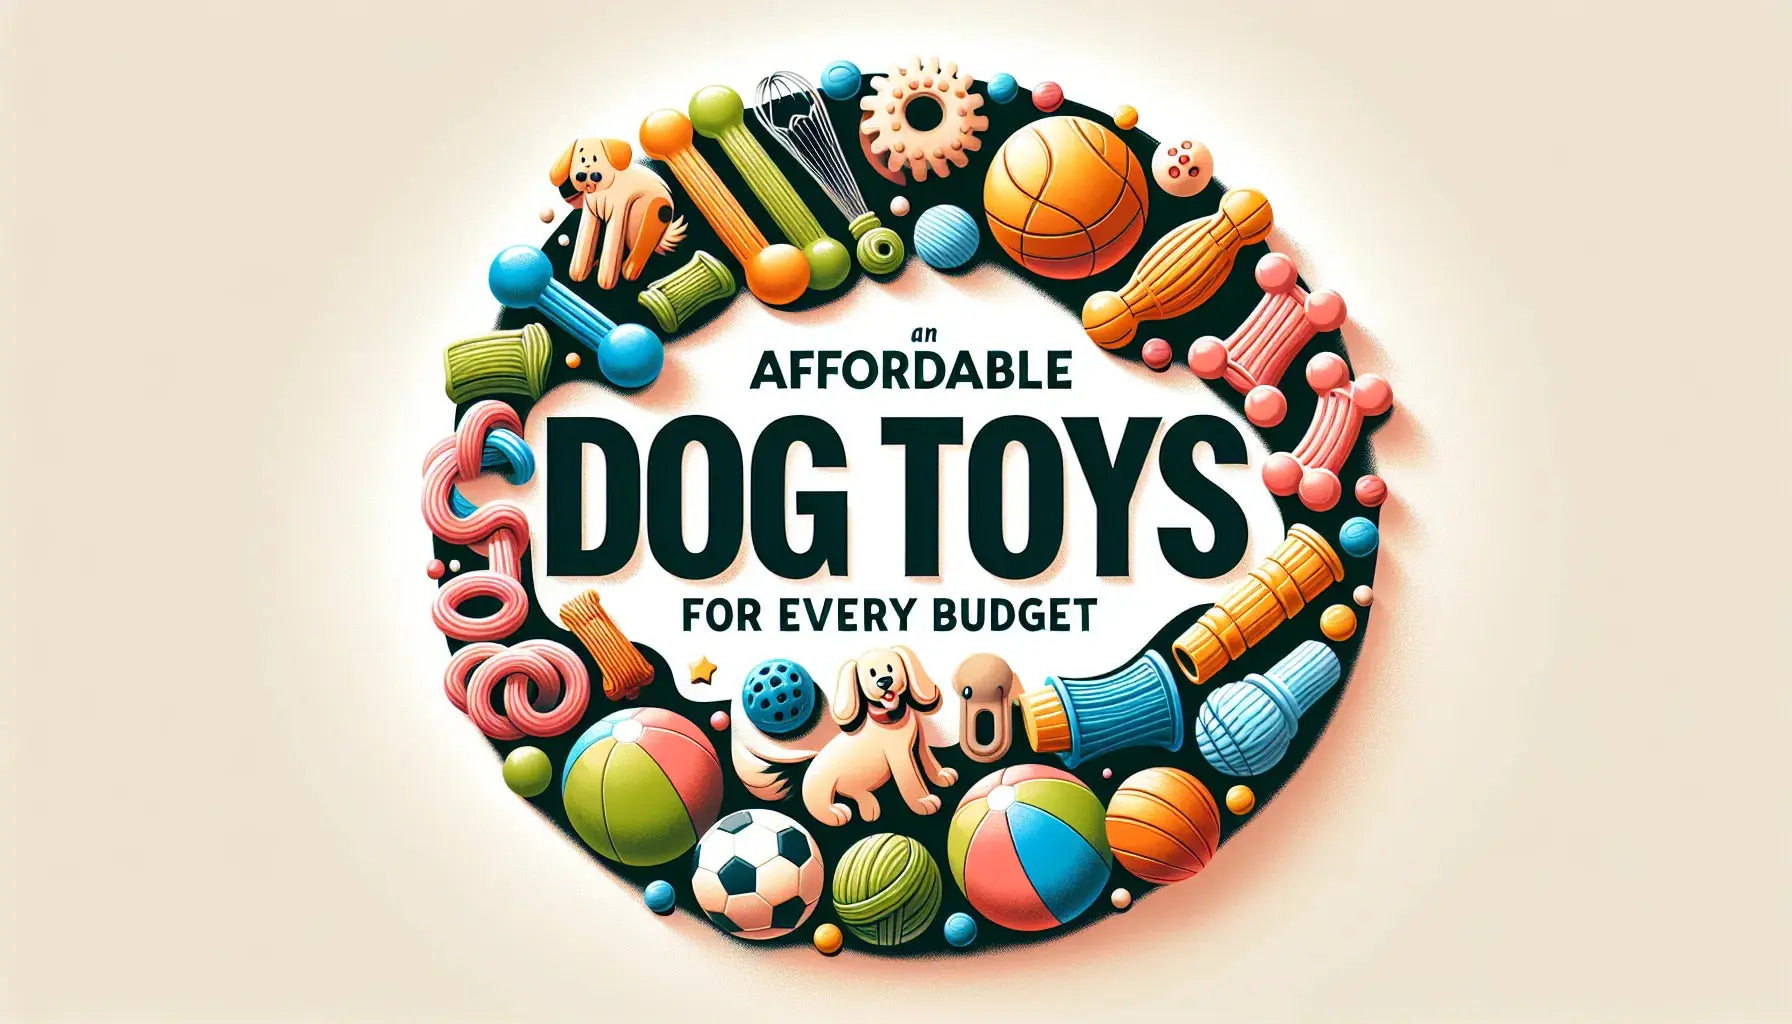 Affordable Dog Toys for Every Budget